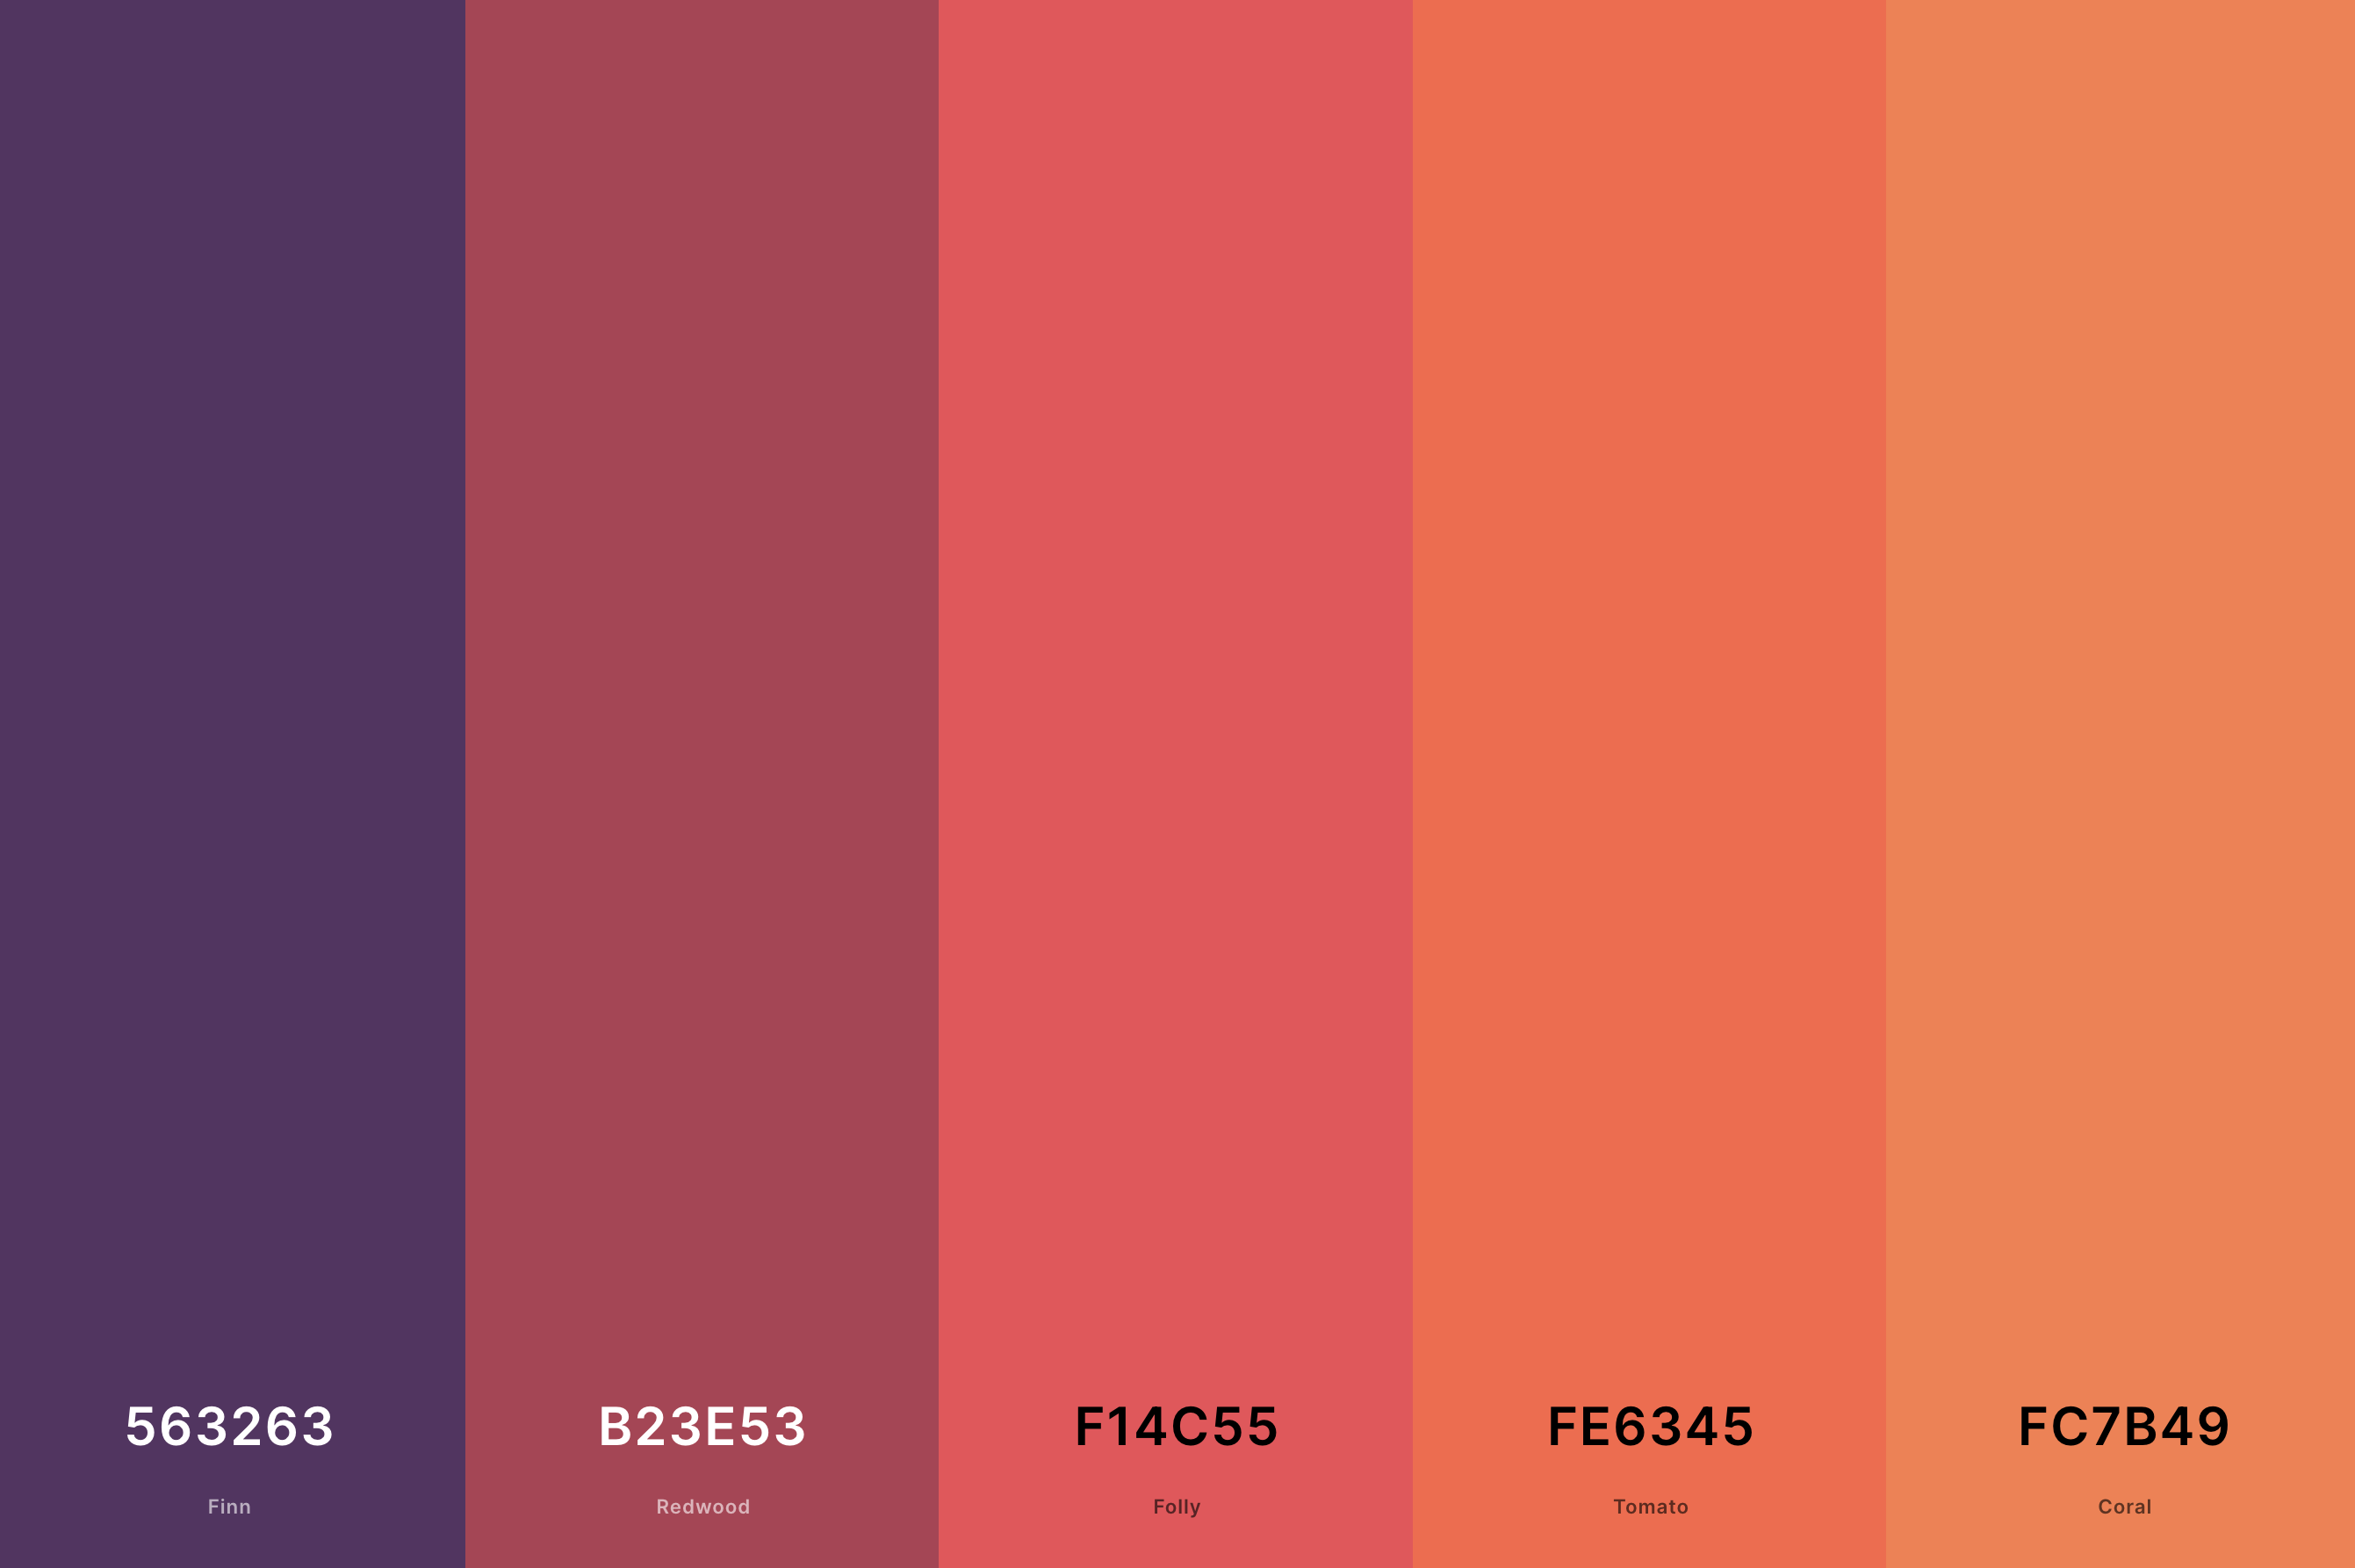 11. Arizona Sunset Color Palette Color Palette with Finn (Hex #563263) + Redwood (Hex #B23E53) + Folly (Hex #F14C55) + Tomato (Hex #FE6345) + Coral (Hex #FC7B49) Color Palette with Hex Codes